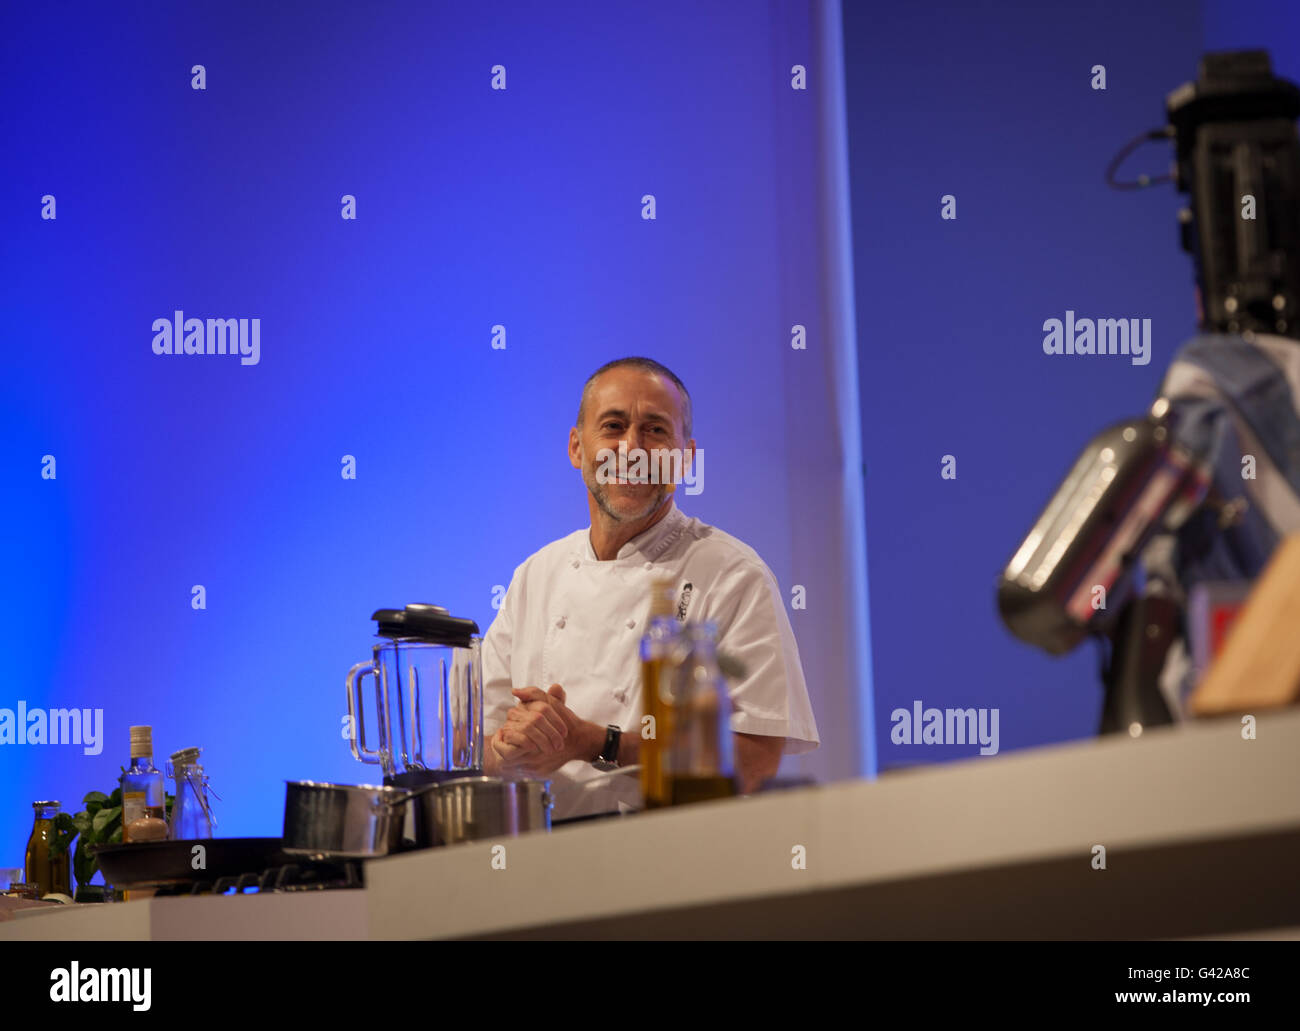 Birmingham, UK. 18th June, 2016. Michel Roux jr doing a cooking demo in the Super Theatre Credit:  steven roe/Alamy Live News Stock Photo